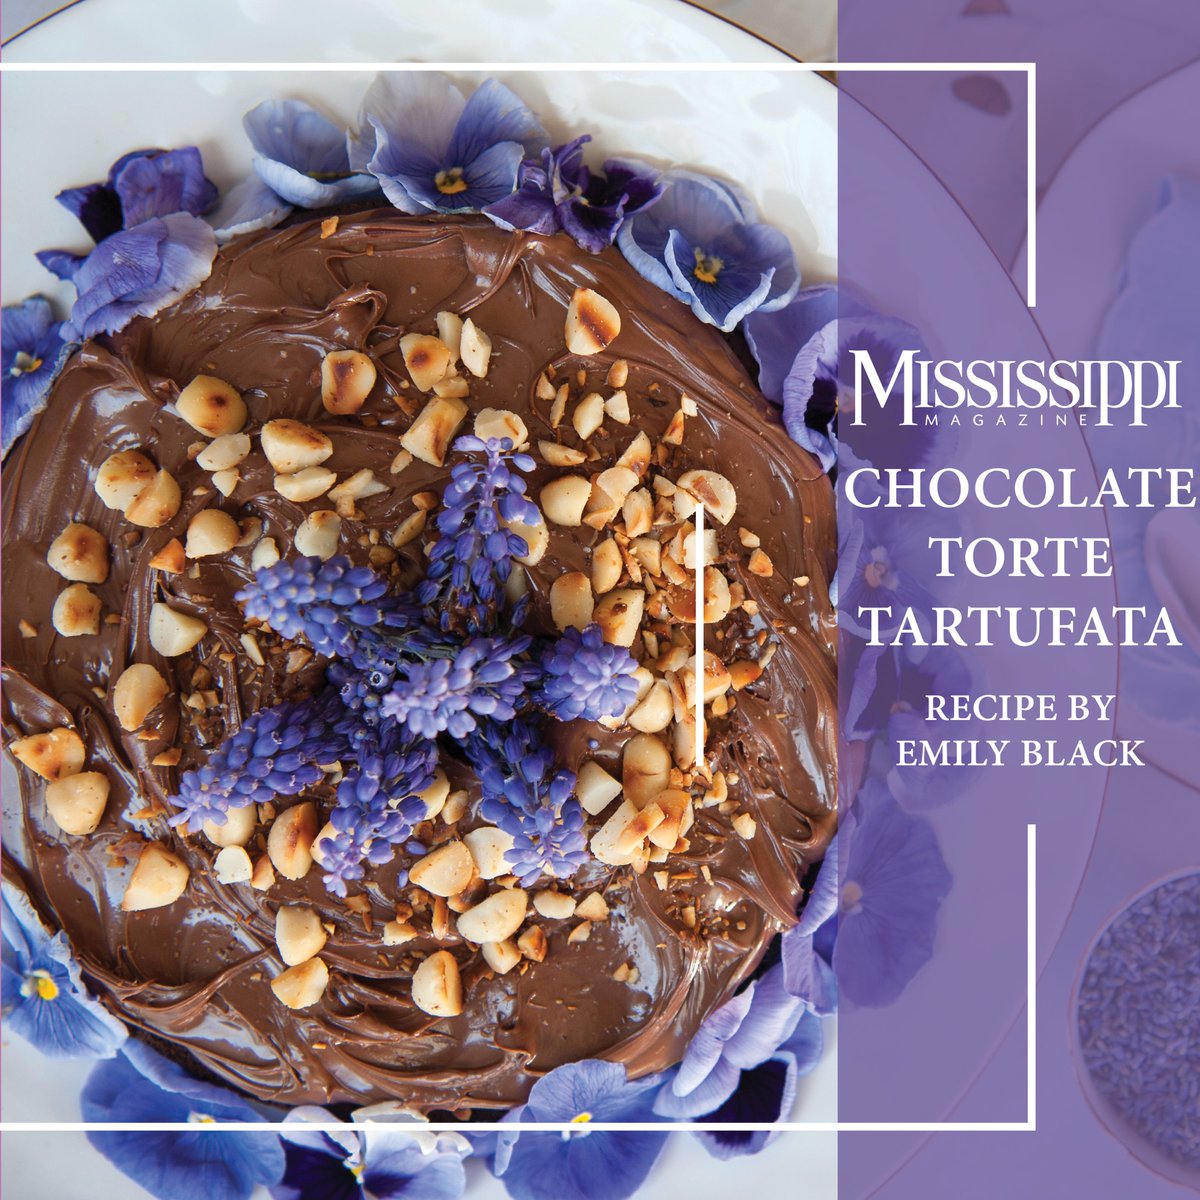 Indulge in the flavors of spring with our decadent Chocolate Tore Tartufata paired with fragrant lavender ice cream. Click the link in our profile or below for this recipe, which is sure to impress at any gathering. Enjoy! : mismag.com/chocolate-tort…